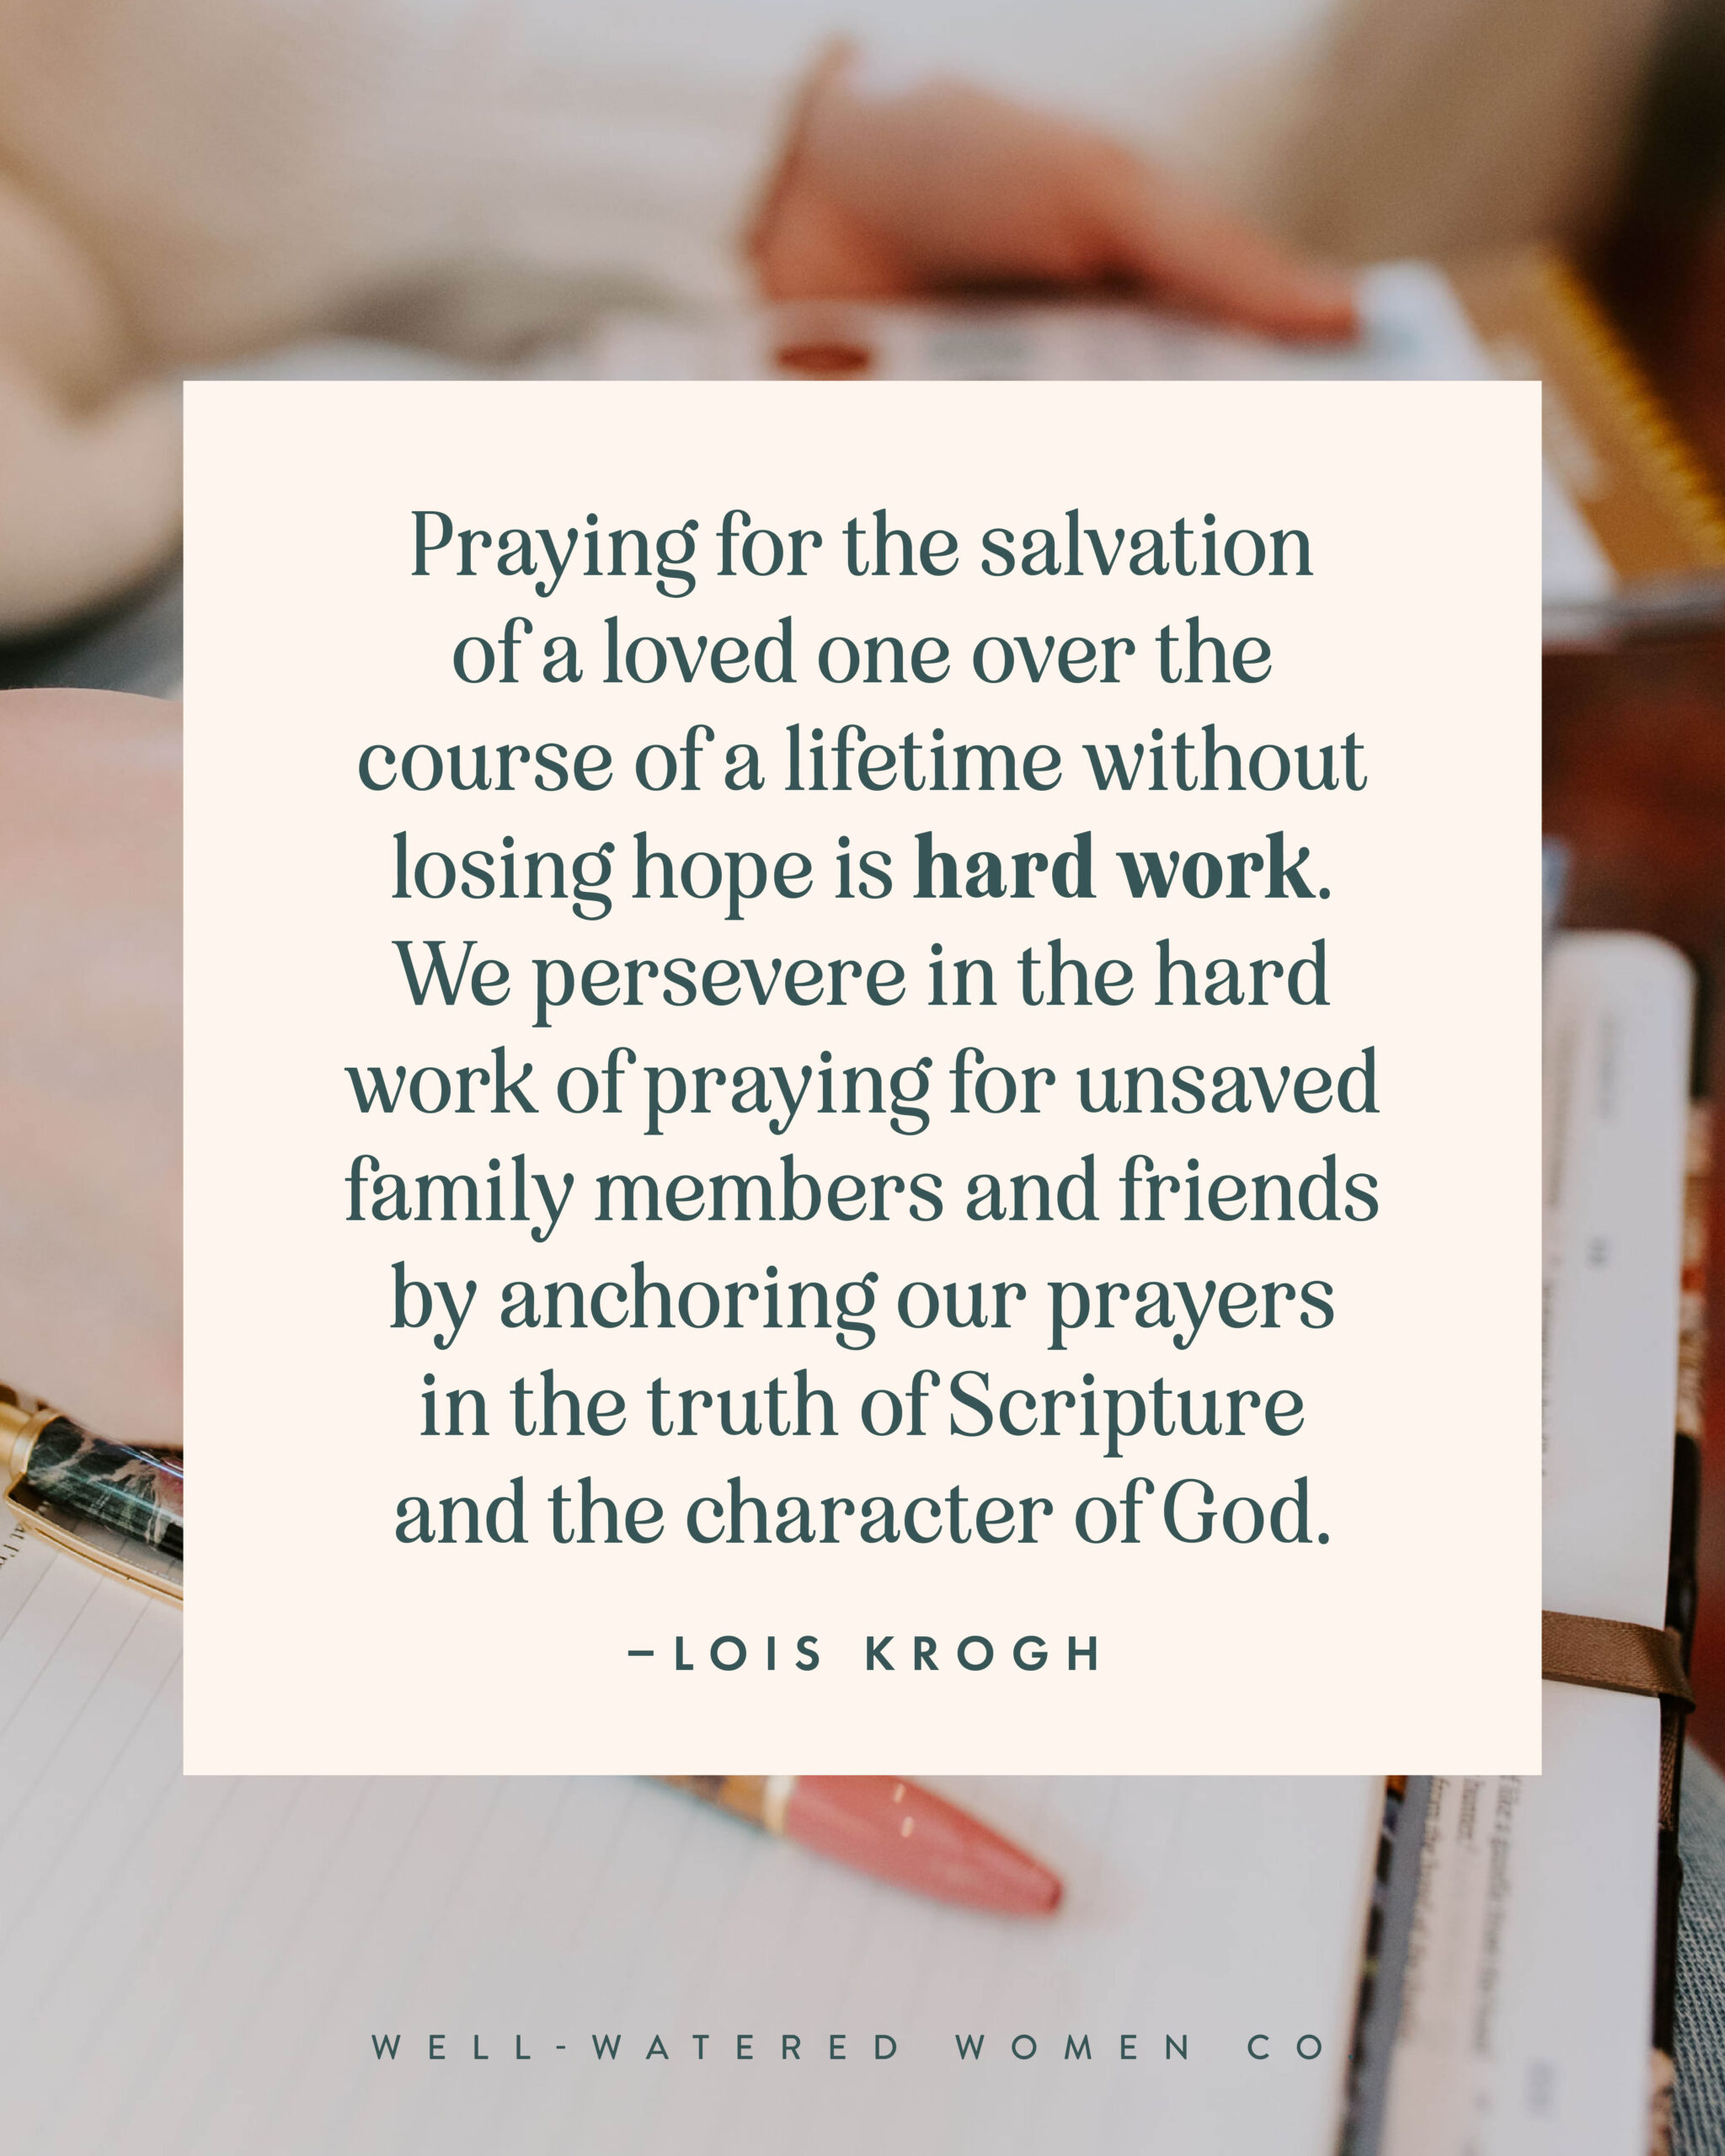 Persevere in Praying for Unbelieving Loved Ones - an article from Well-Watered Women - quote